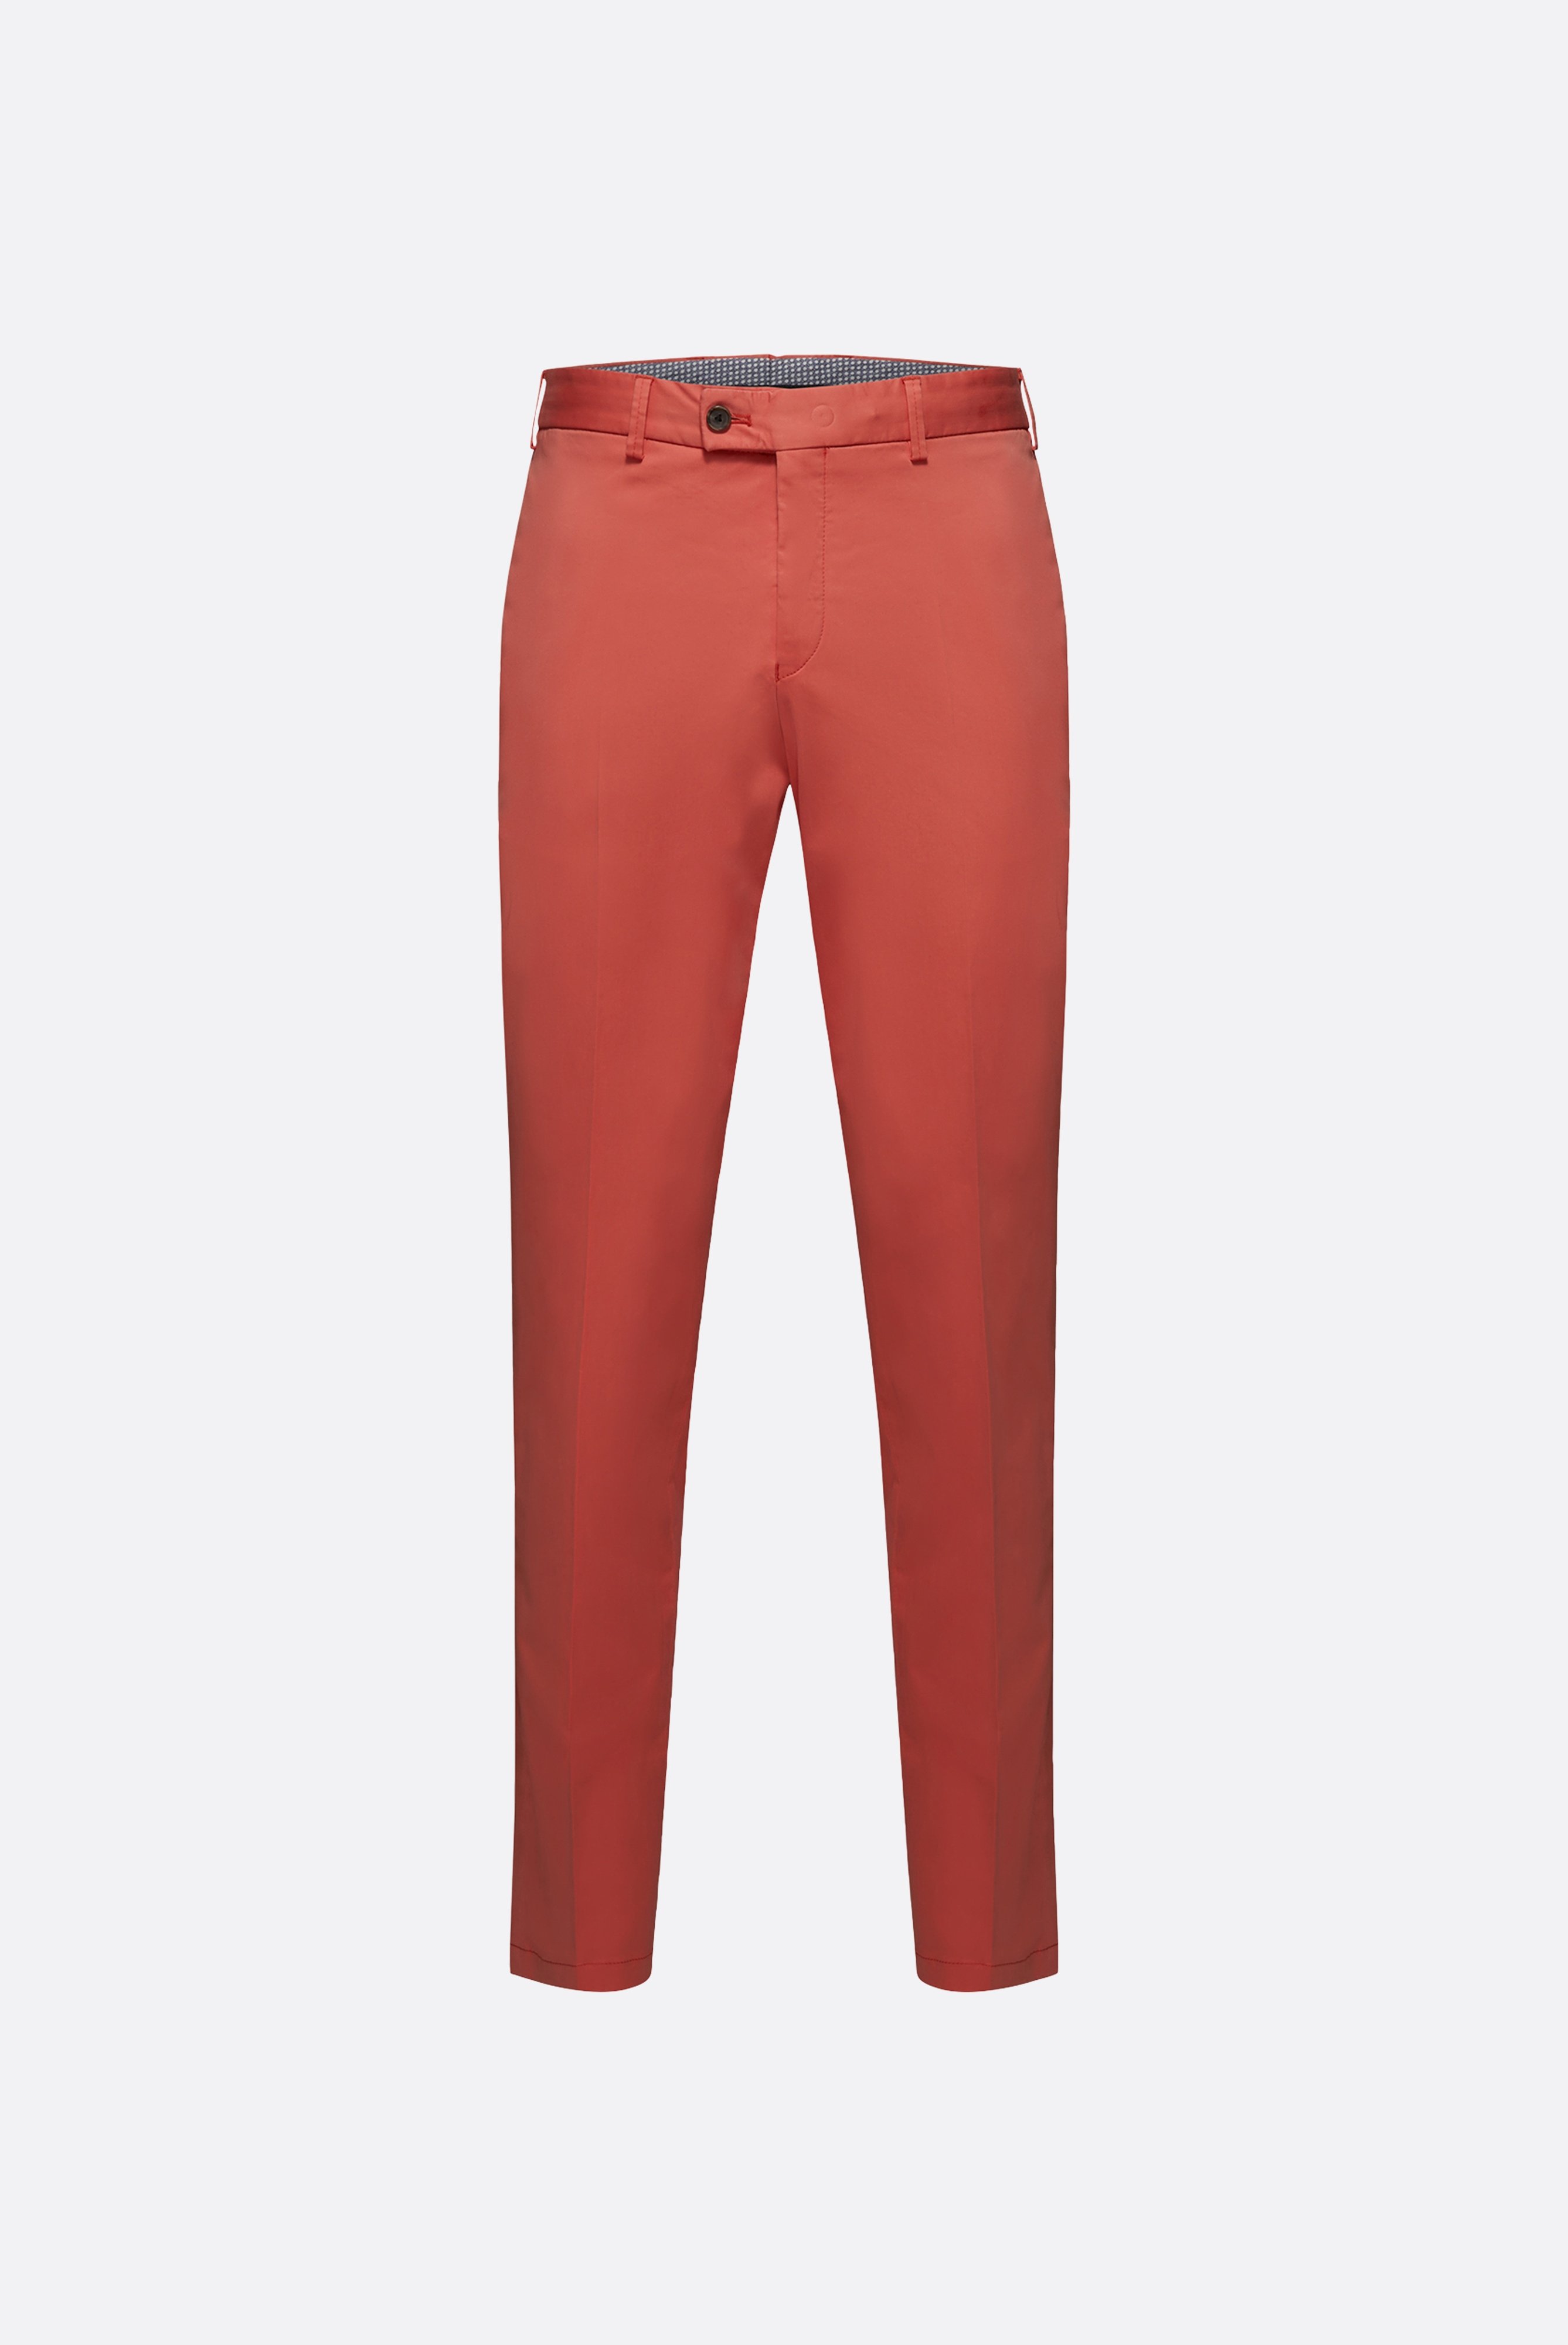 Jeans & Trousers+Cotton with Stretch Tapered Chinos+80.7858..J00151.440.48